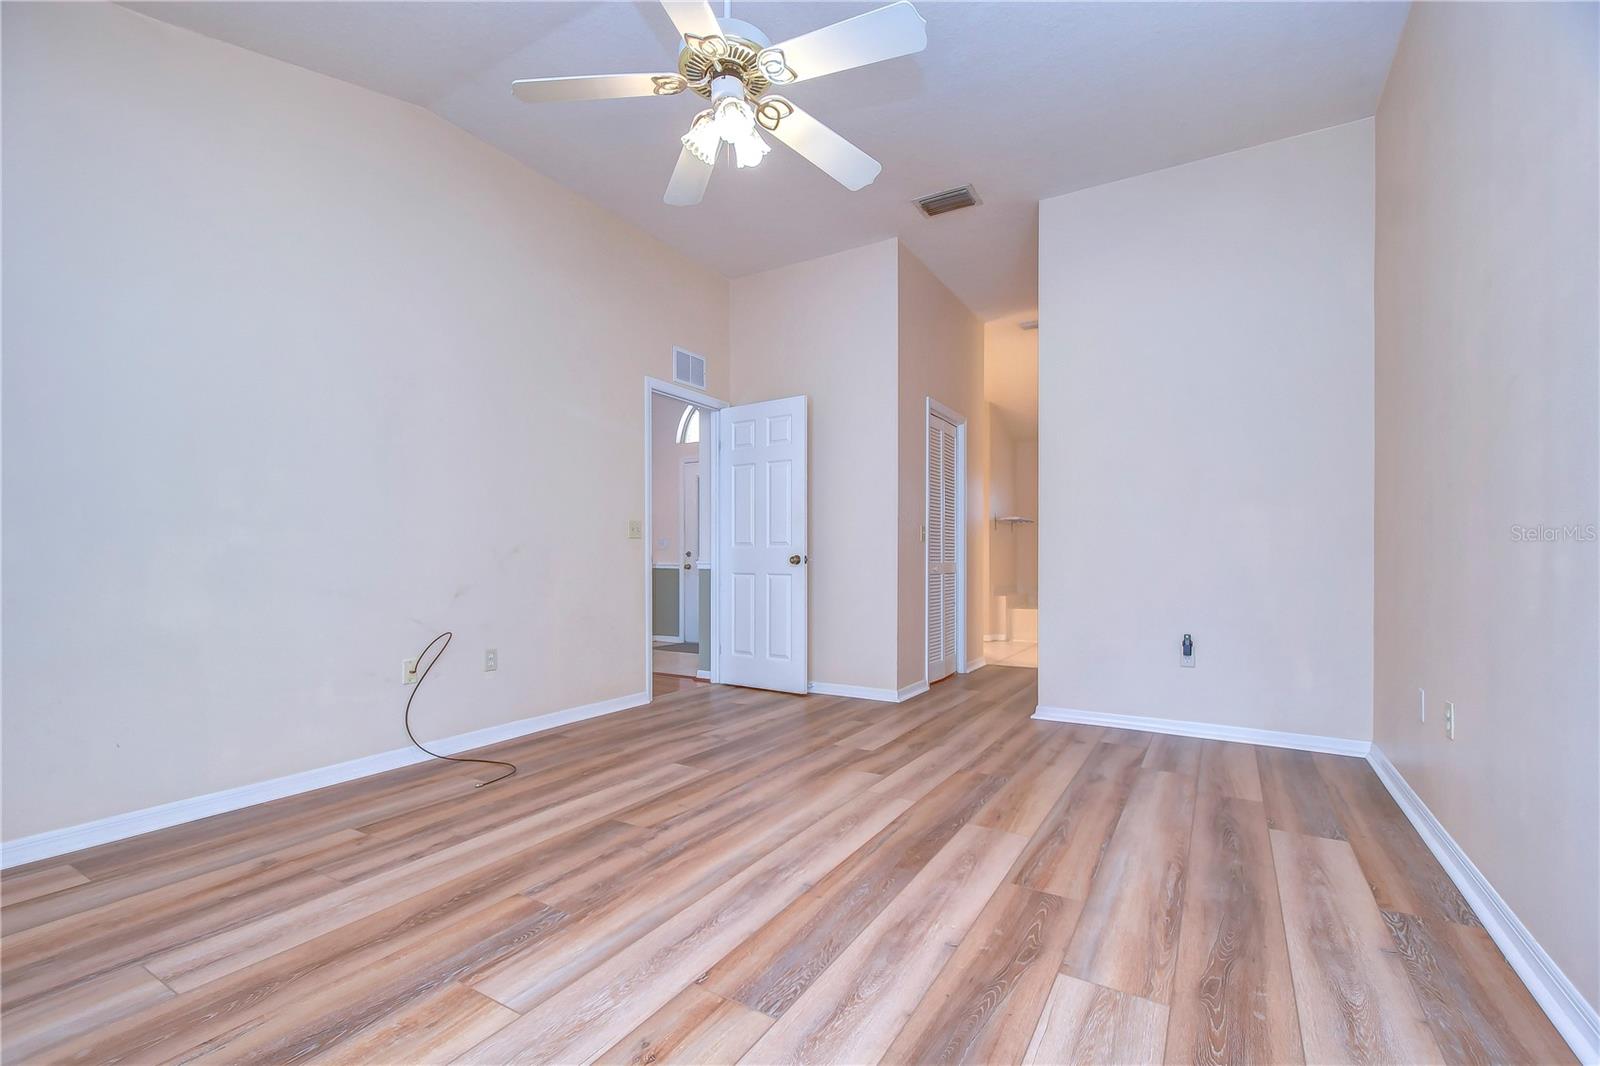 High Ceilings and updated flooring!